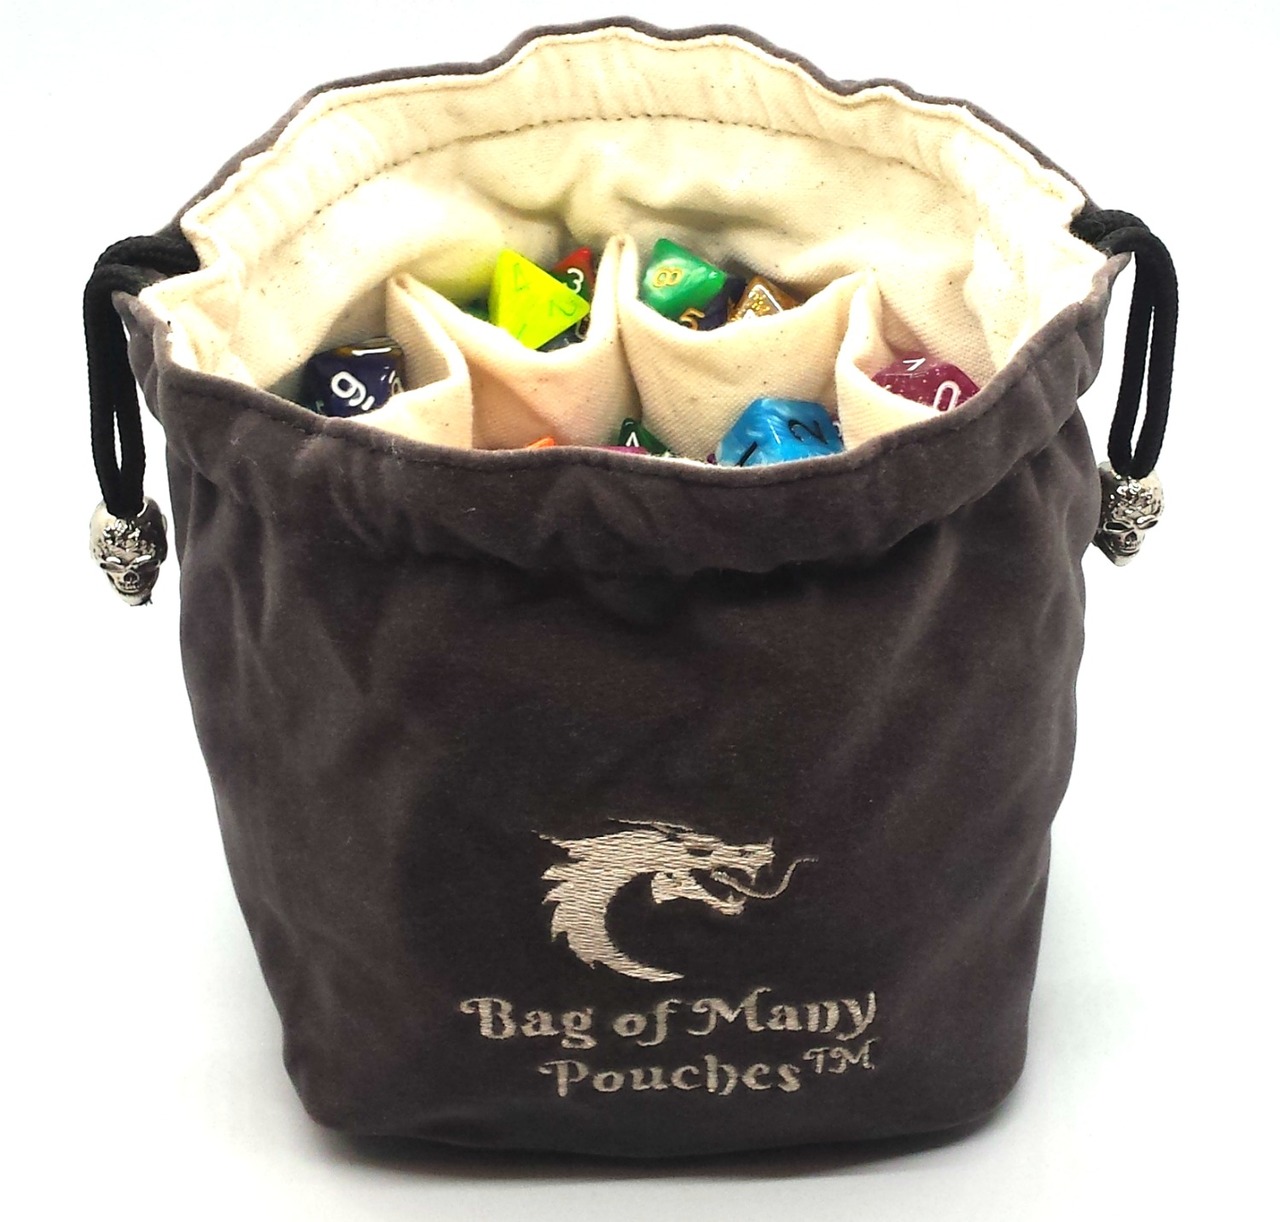 Bag of Many Pouches RPG Dnd Dice Bag Gray